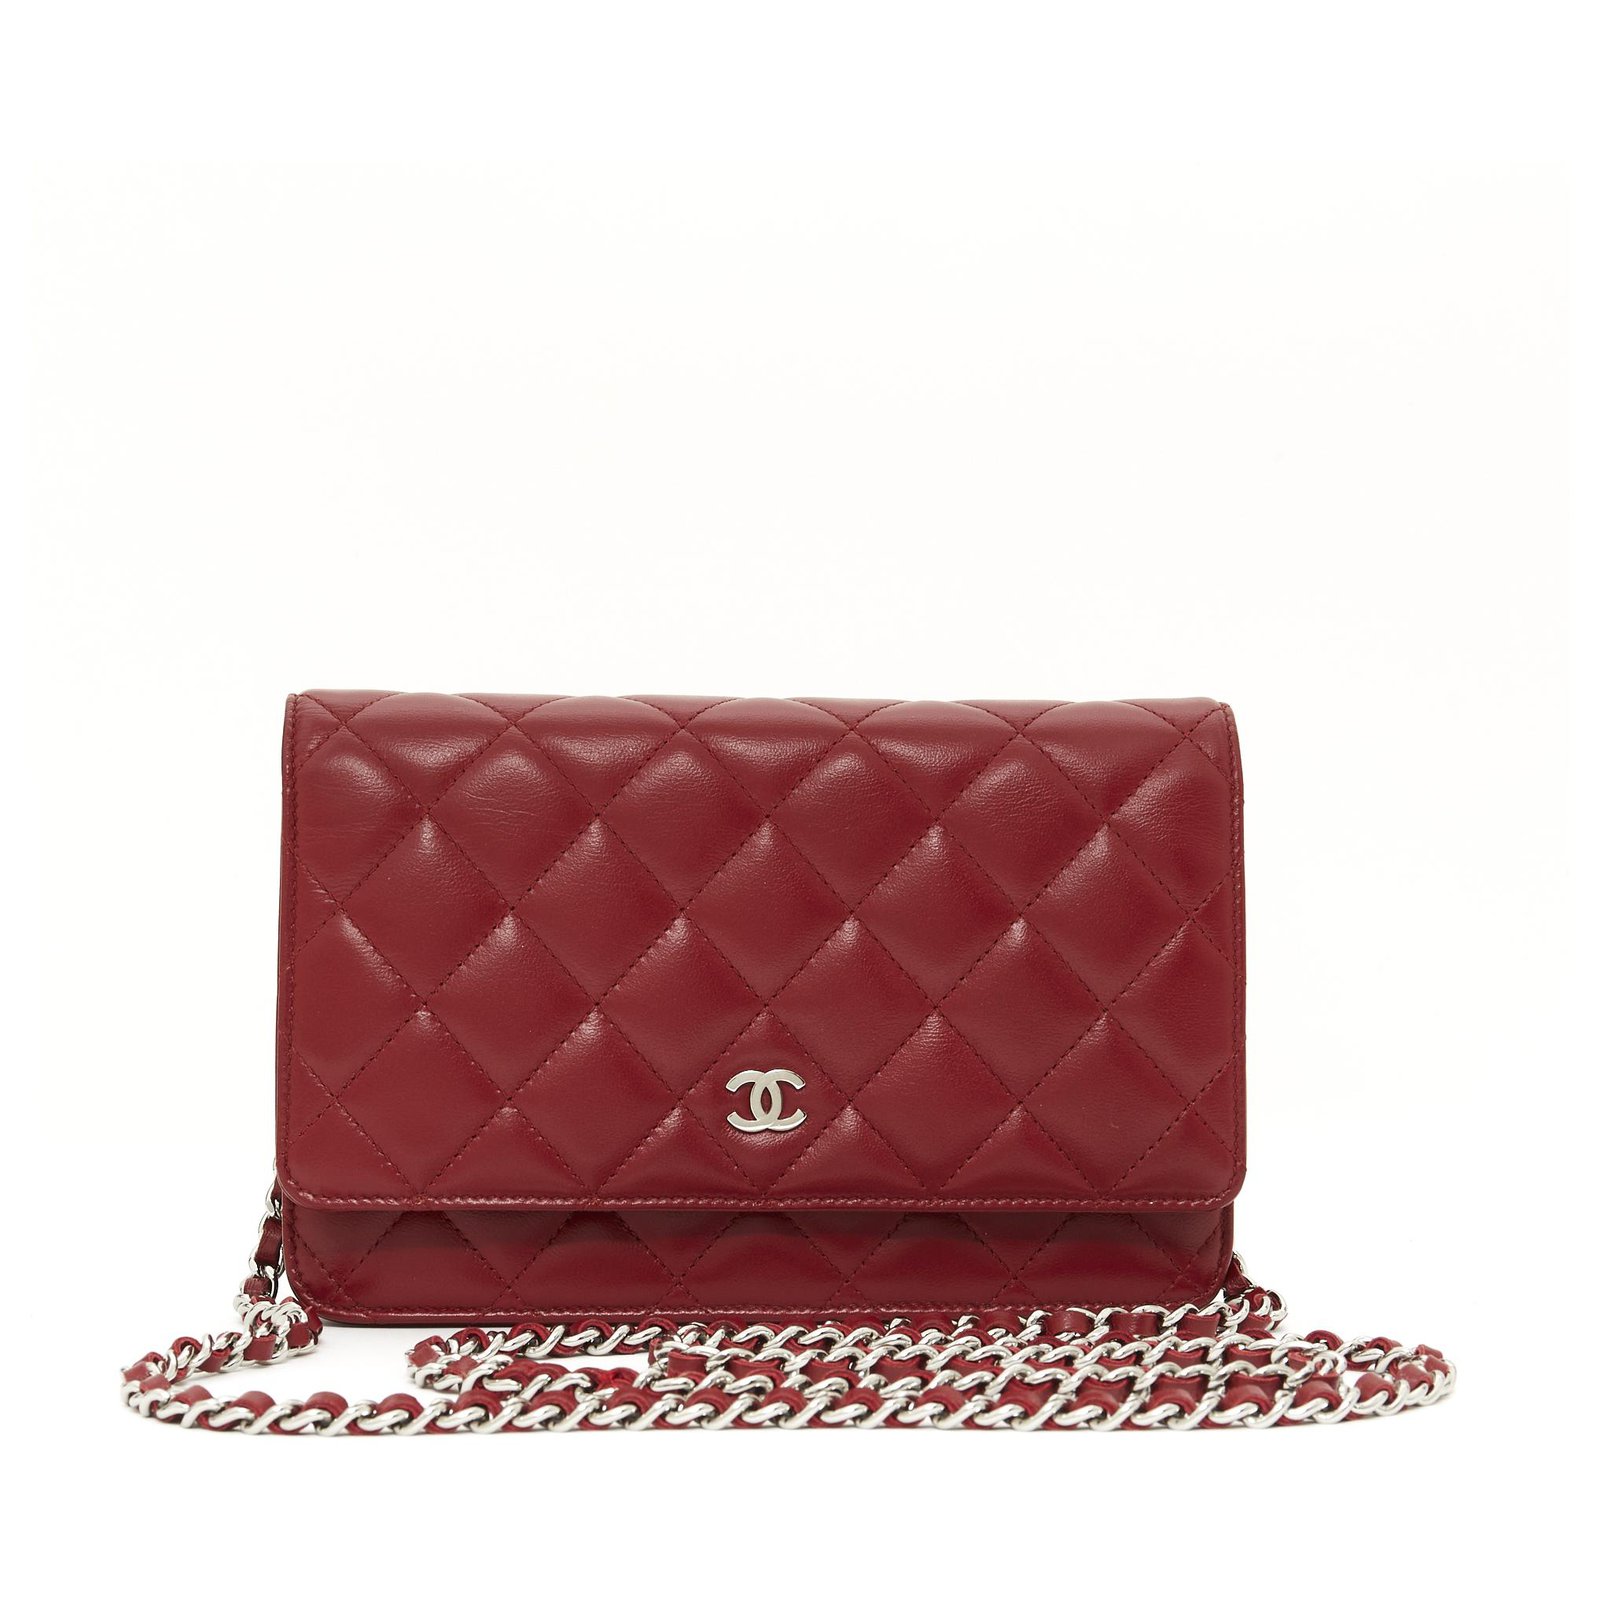 Chanel Lambskin Leather Woc in Red with Silver Hardware